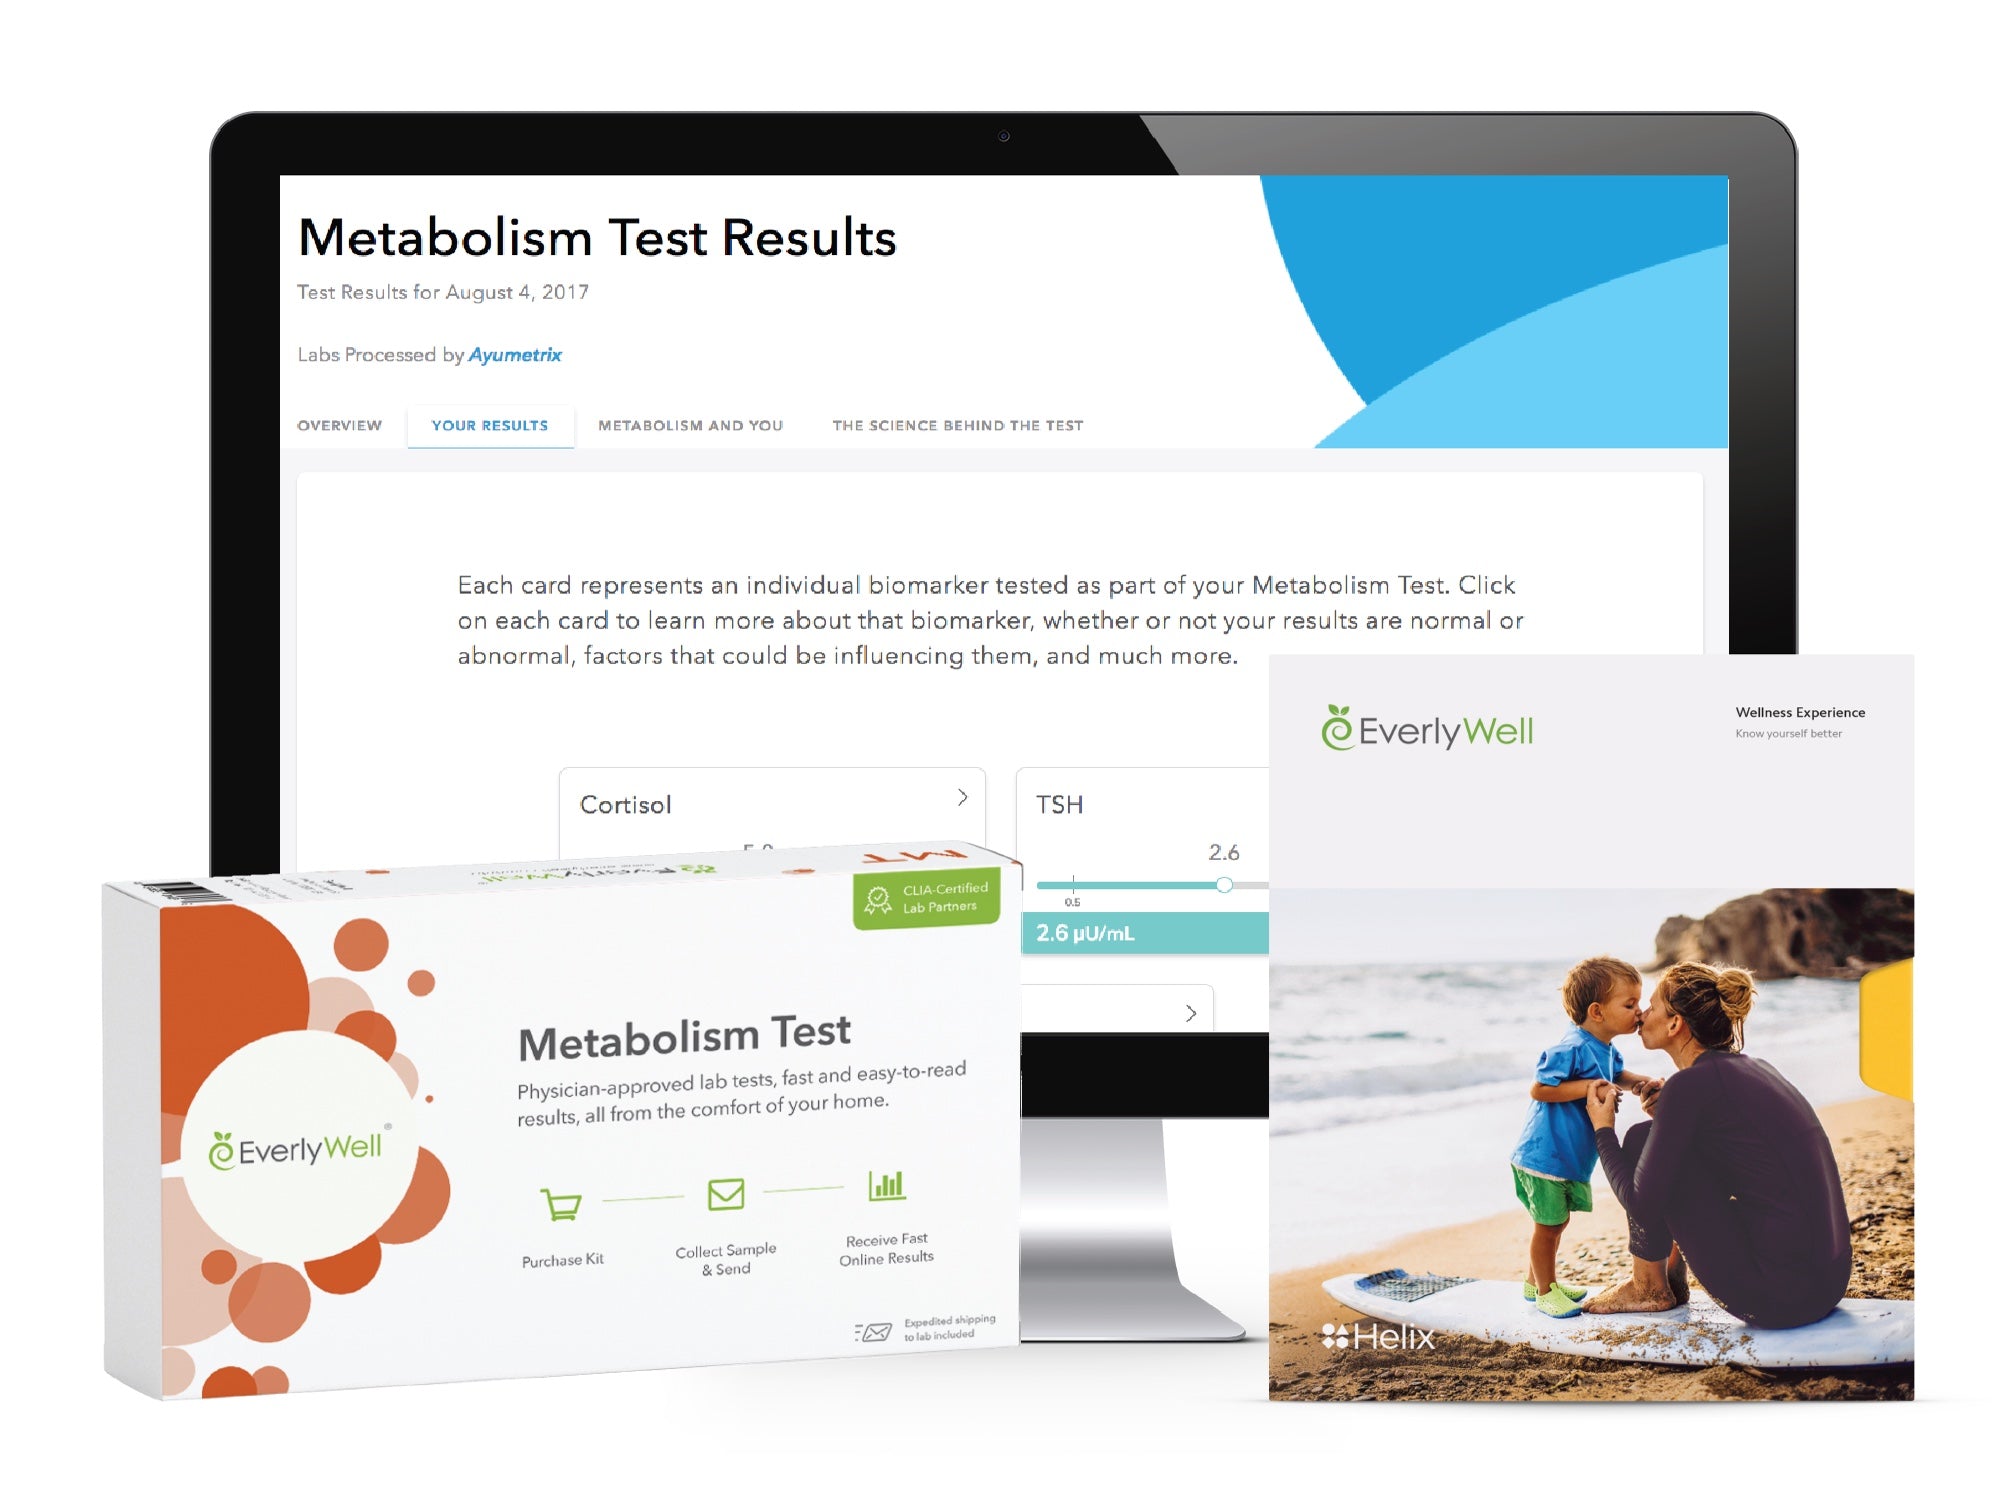 Learn the impact your DNA may have on your weight, and check your current hormone levels with the EverlyWell companion kit.